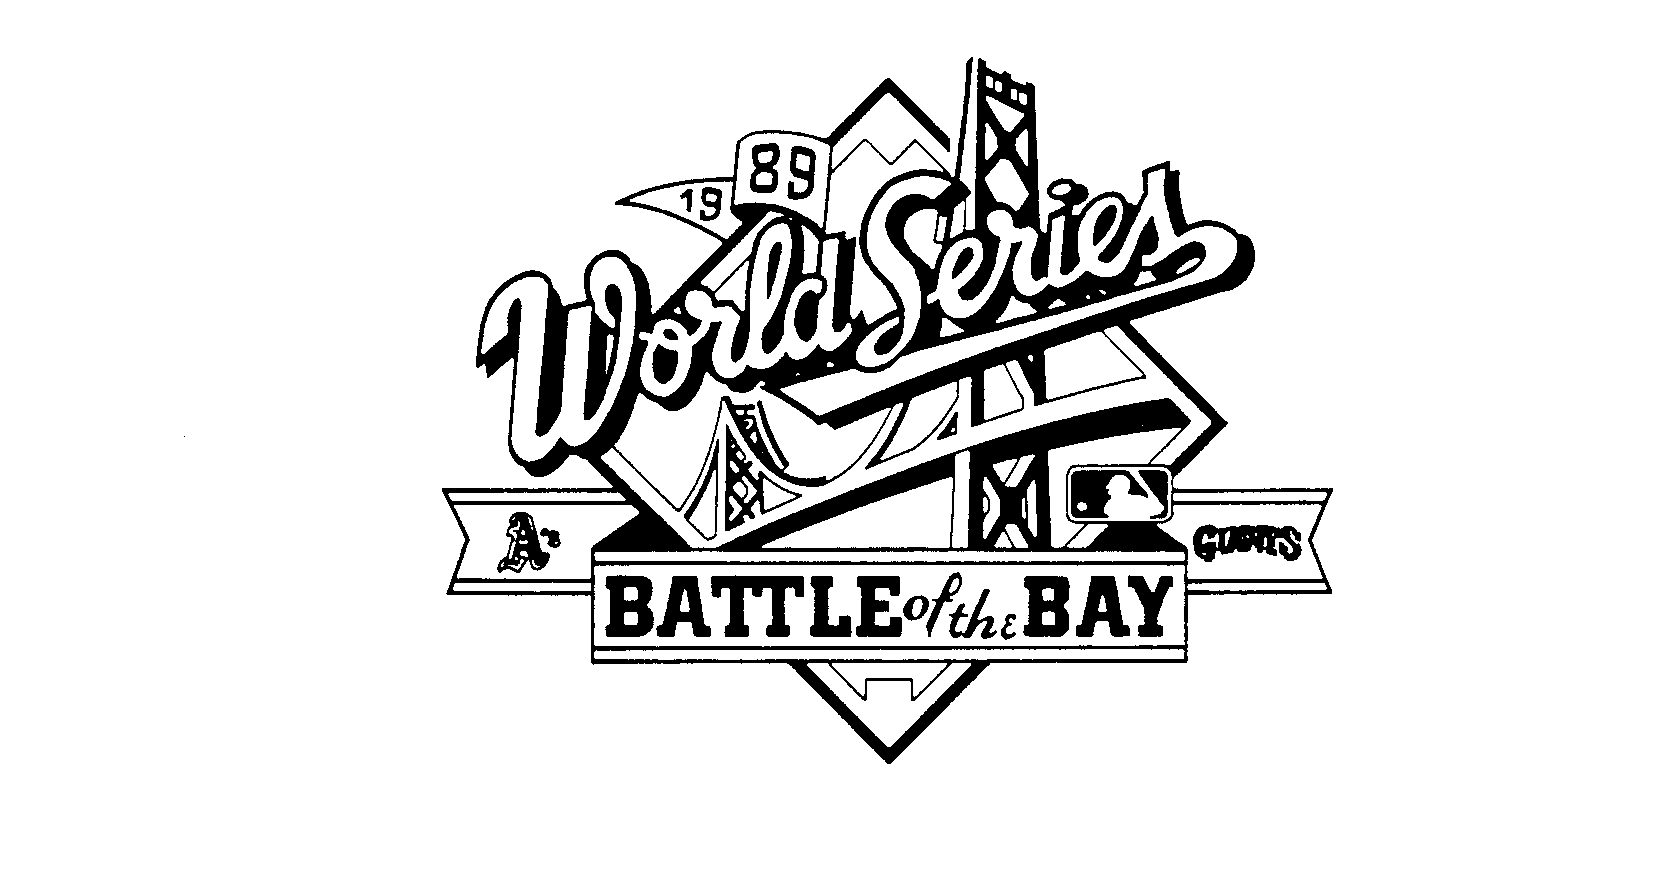  1989 WORLD SERIES BATTLE OF THE BAY A'S GIANTS